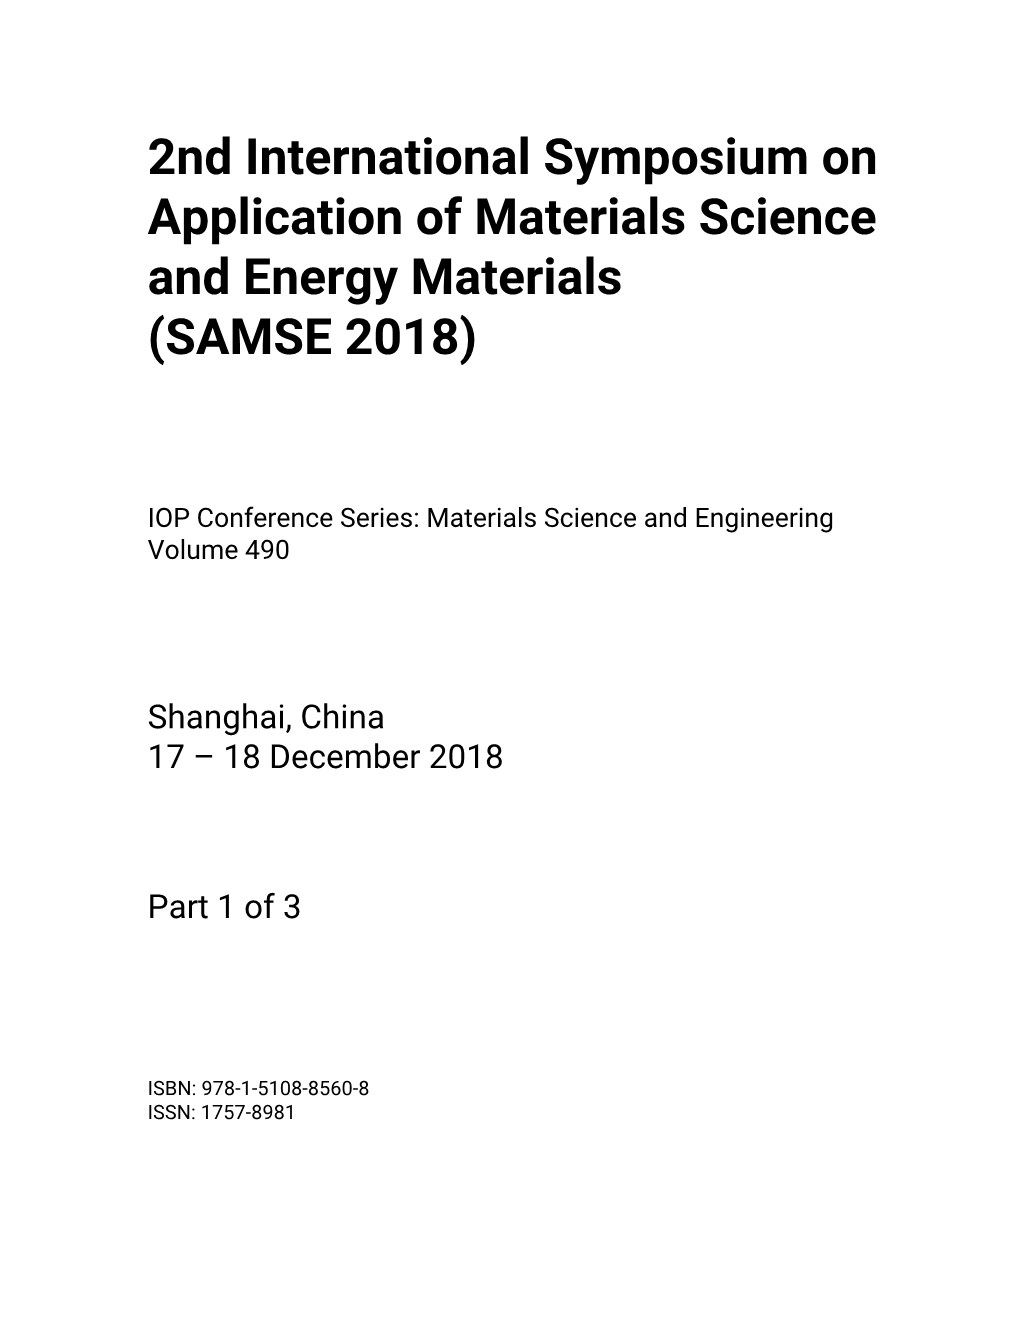 2Nd International Symposium on Application of Materials Science and Energy Materials